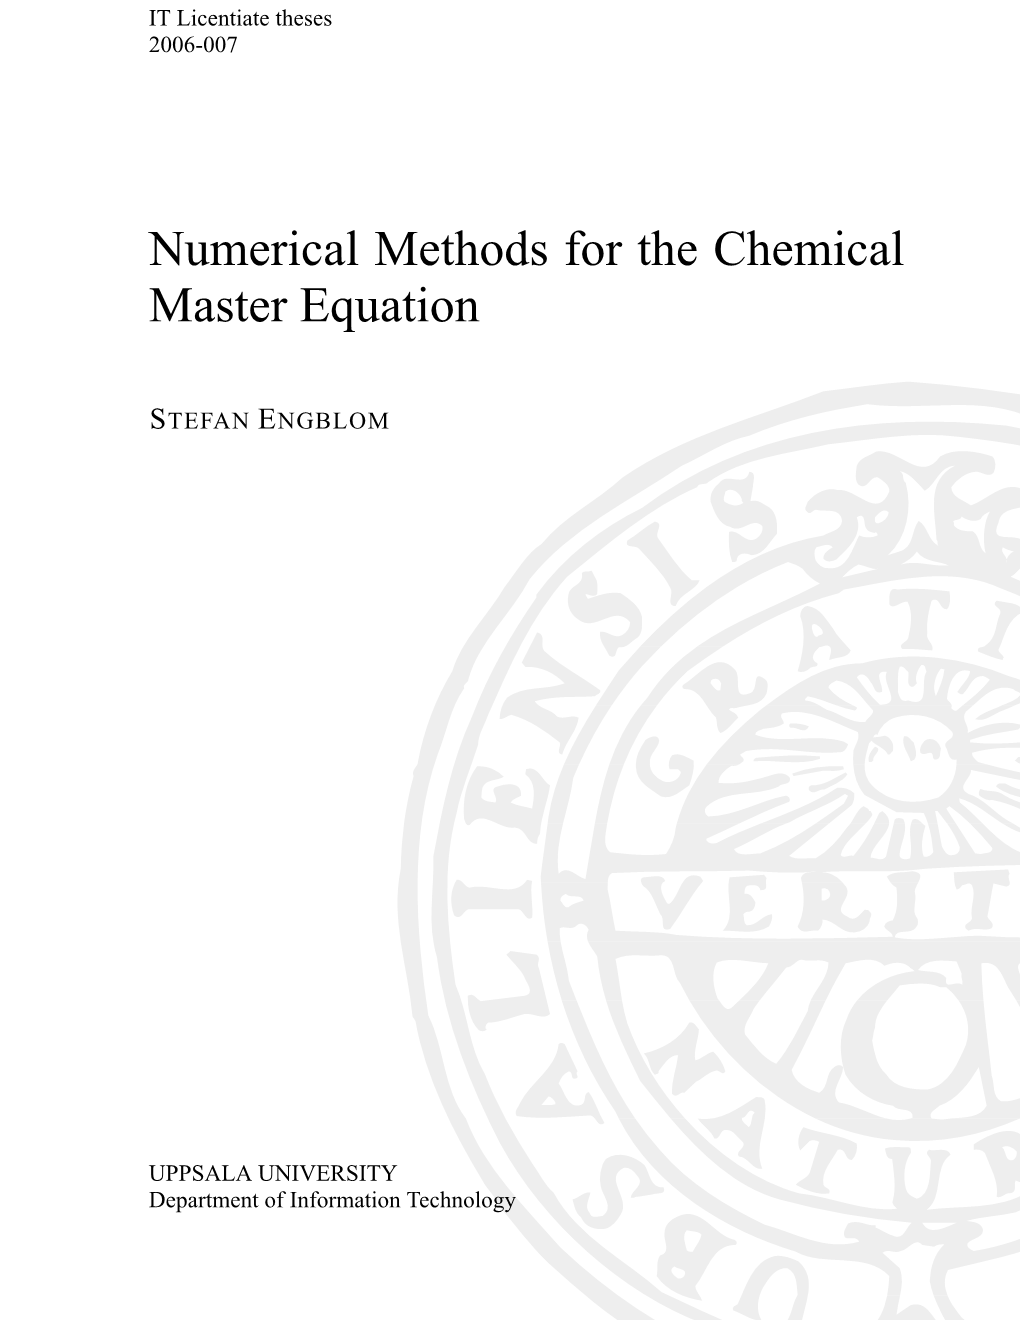 Numerical Methods for the Chemical Master Equation